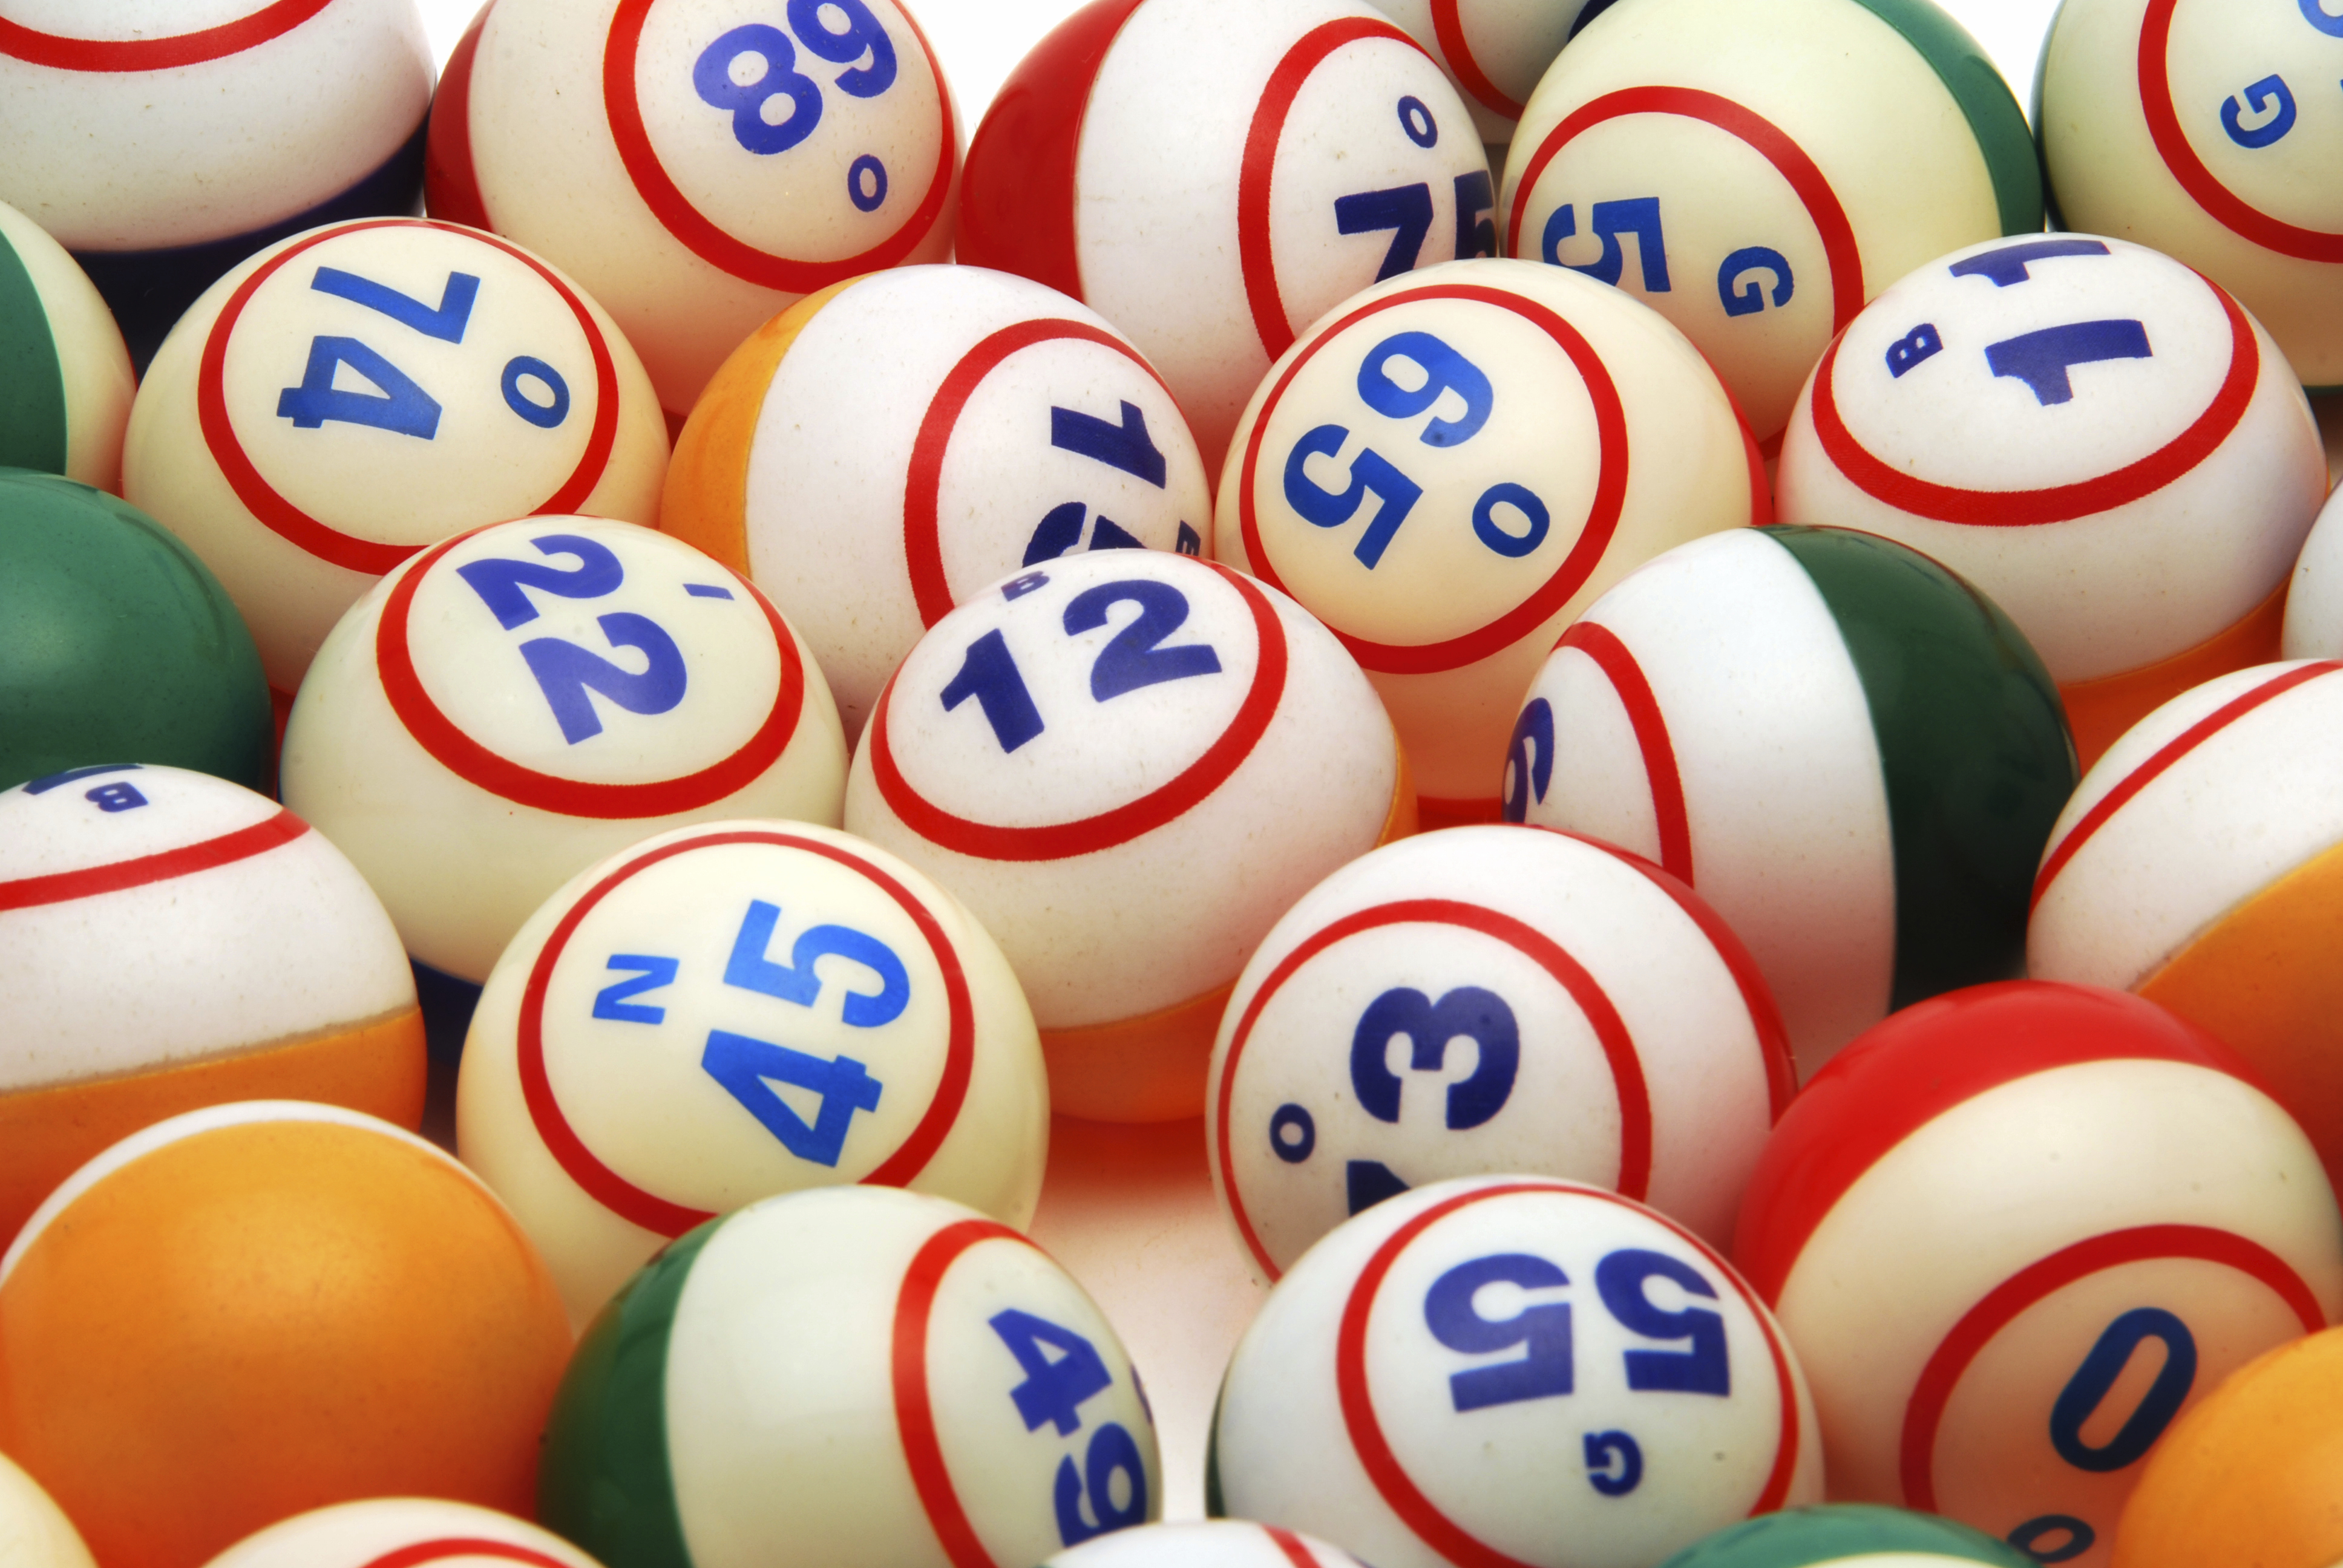 colorful balls with numbers on them that are used for bingo